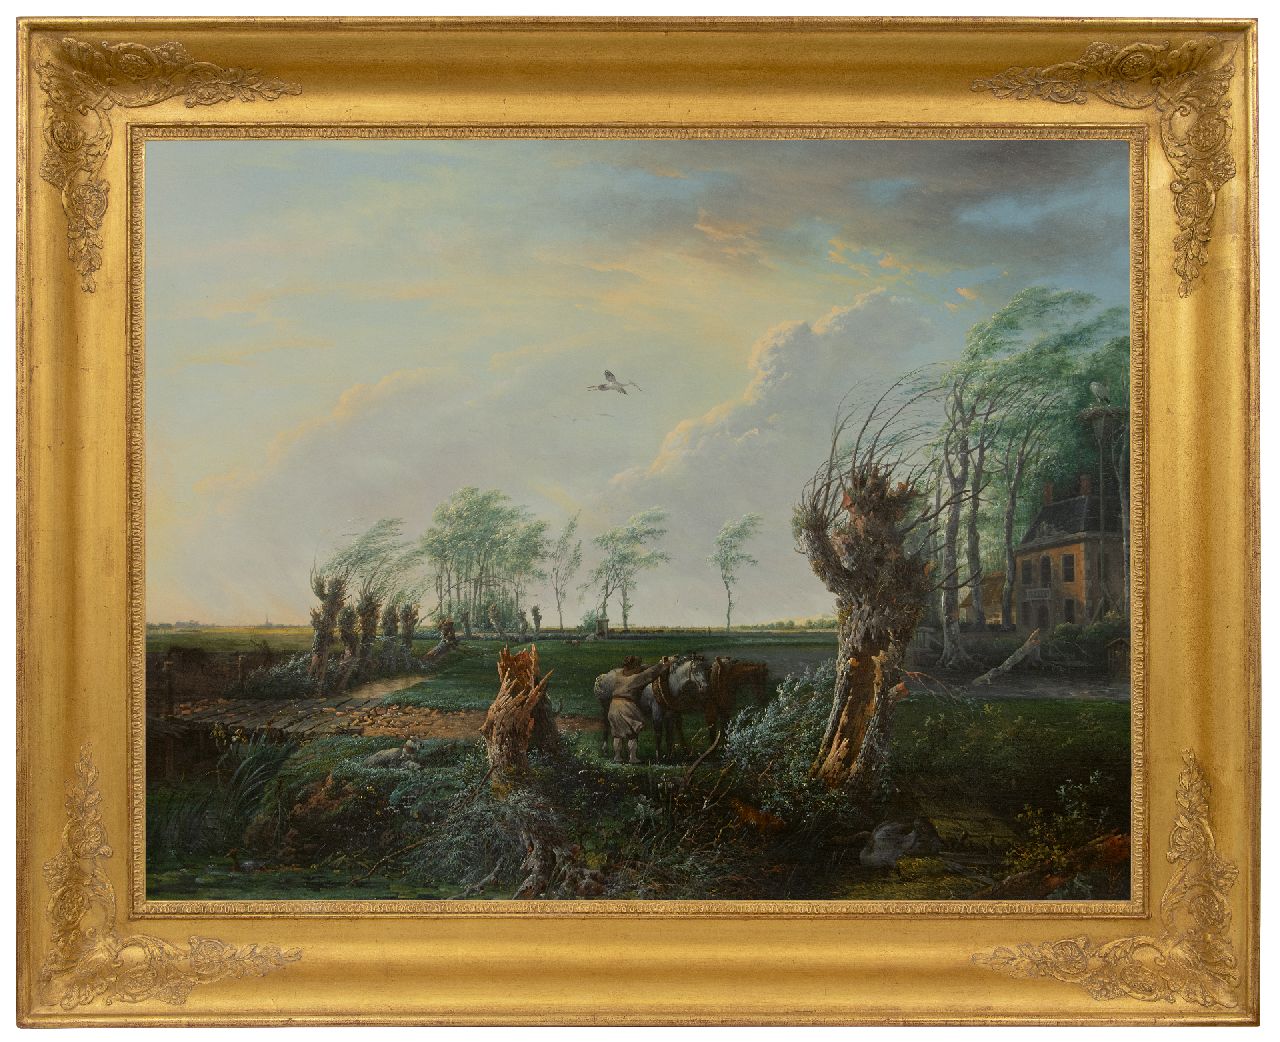 Nijmegen G. van | Gerard van Nijmegen | Paintings offered for sale | A farmer with his horses in a stormy landscape, oil on panel 68.8 x 89.7 cm